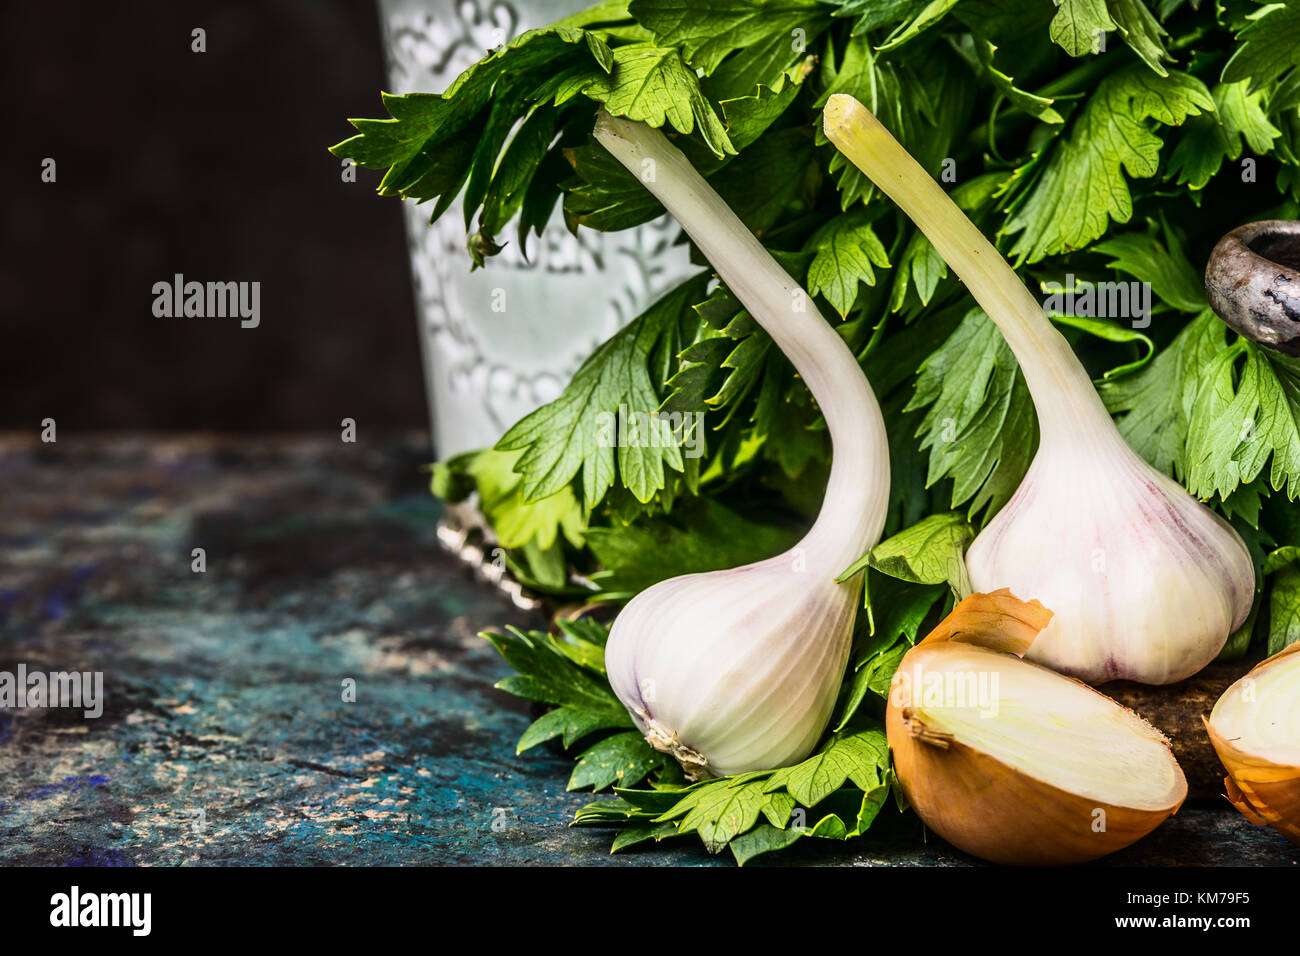 Fresh garlic on rustic wooden table at dark background, front view. Spicy Cooking concept Stock Photo